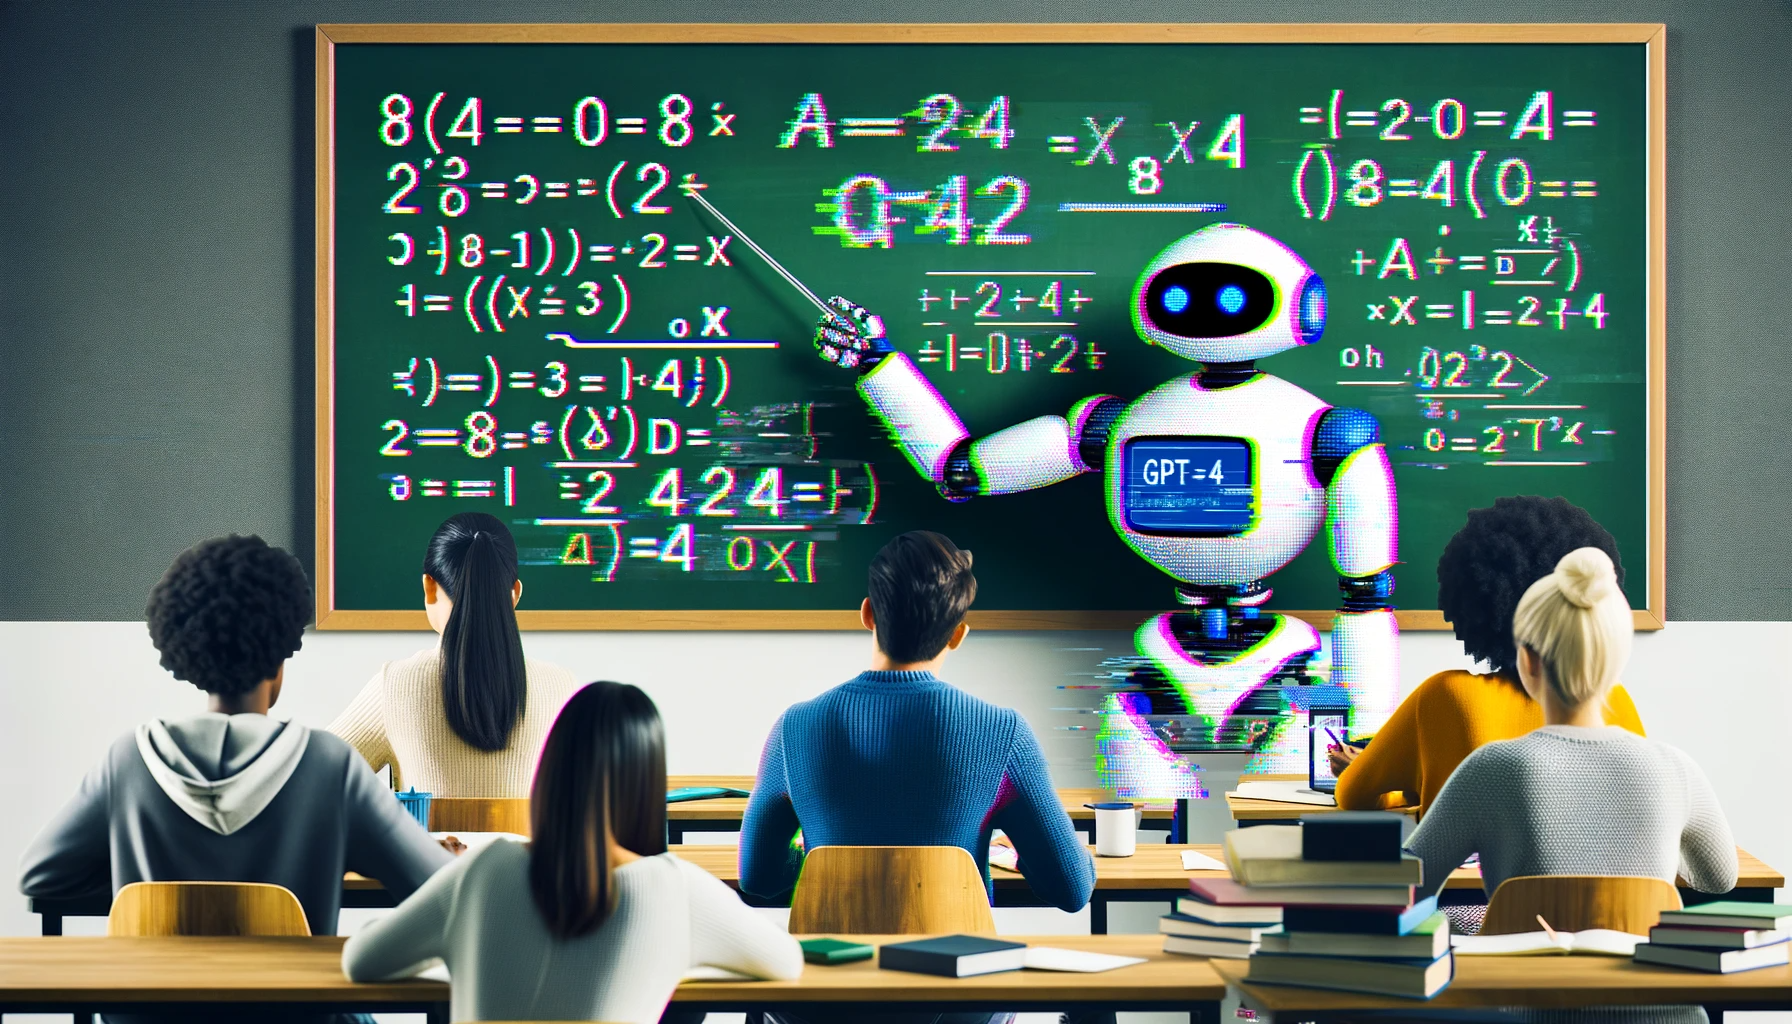 From AI to A+: GPT-4 might make you better at math